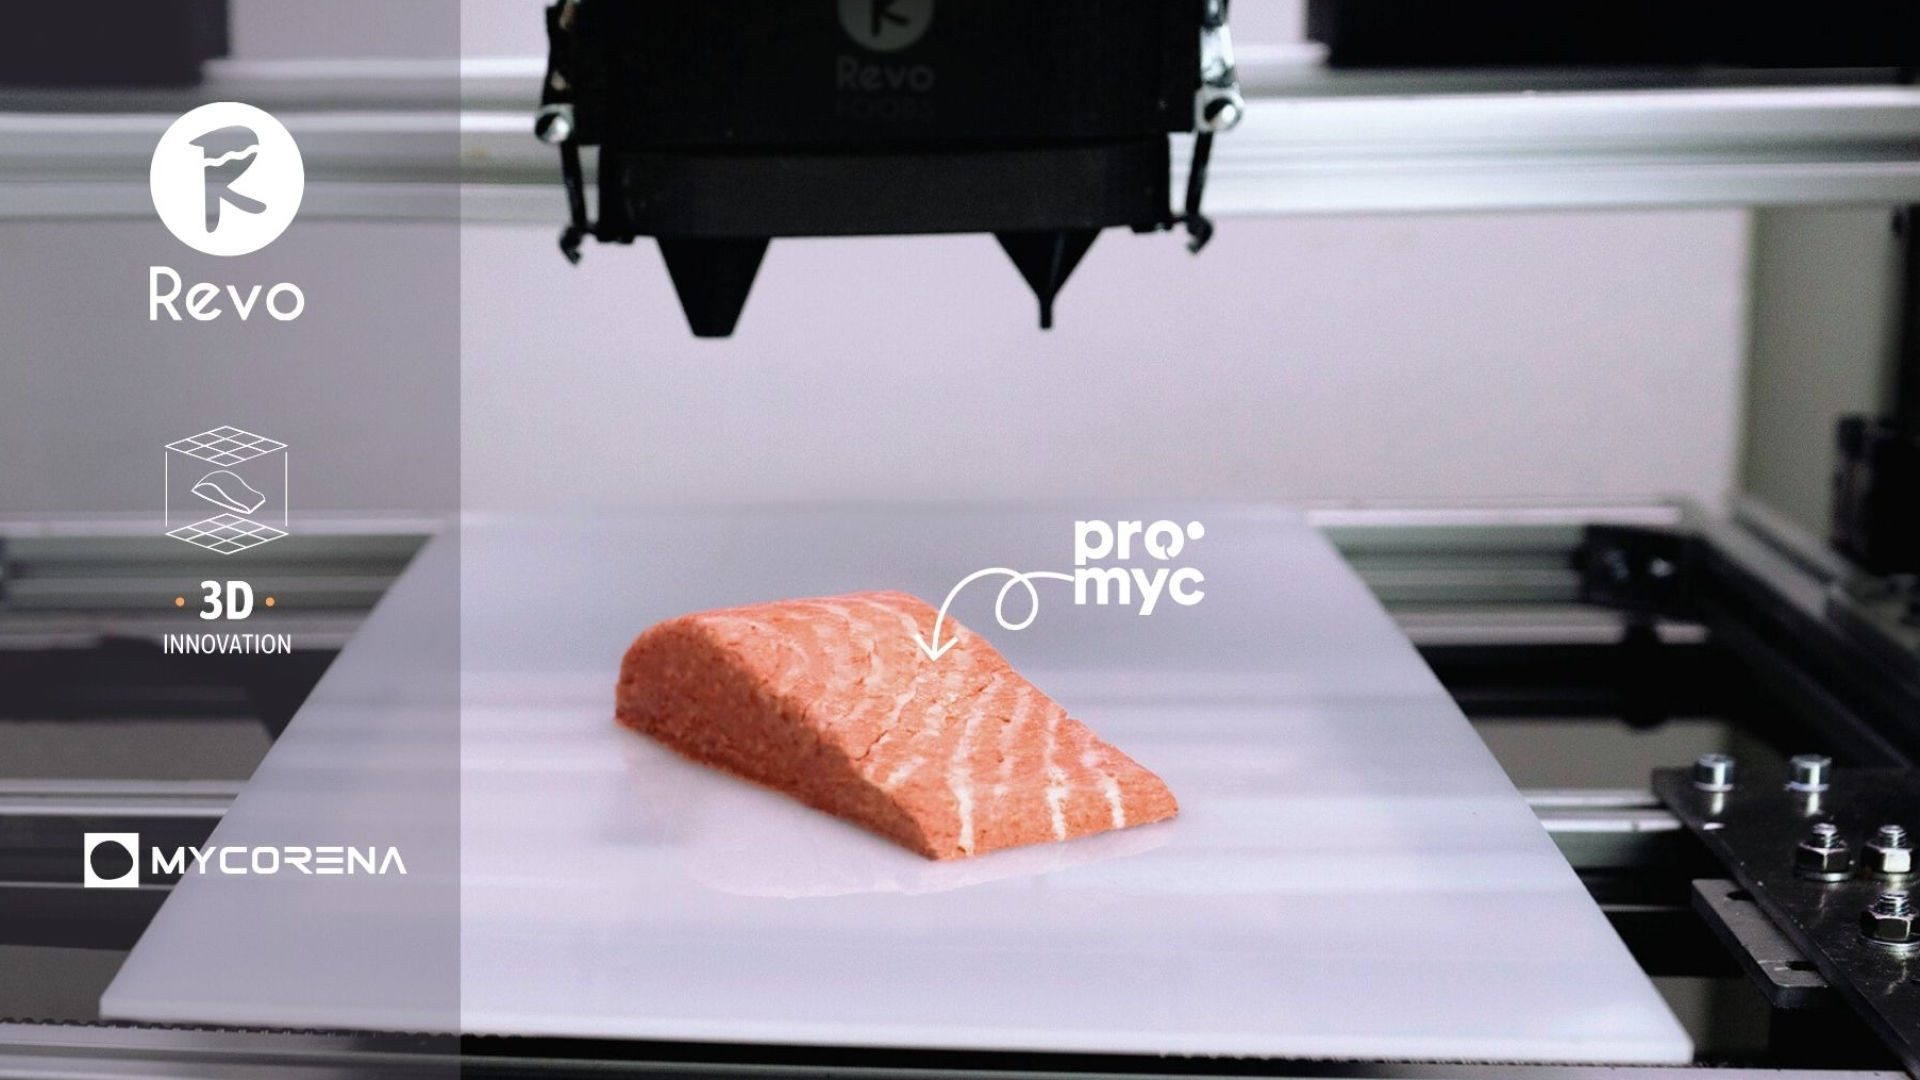 Vegan Salmon Filet becomes first 3D printed mycoprotein product available in supermarkets